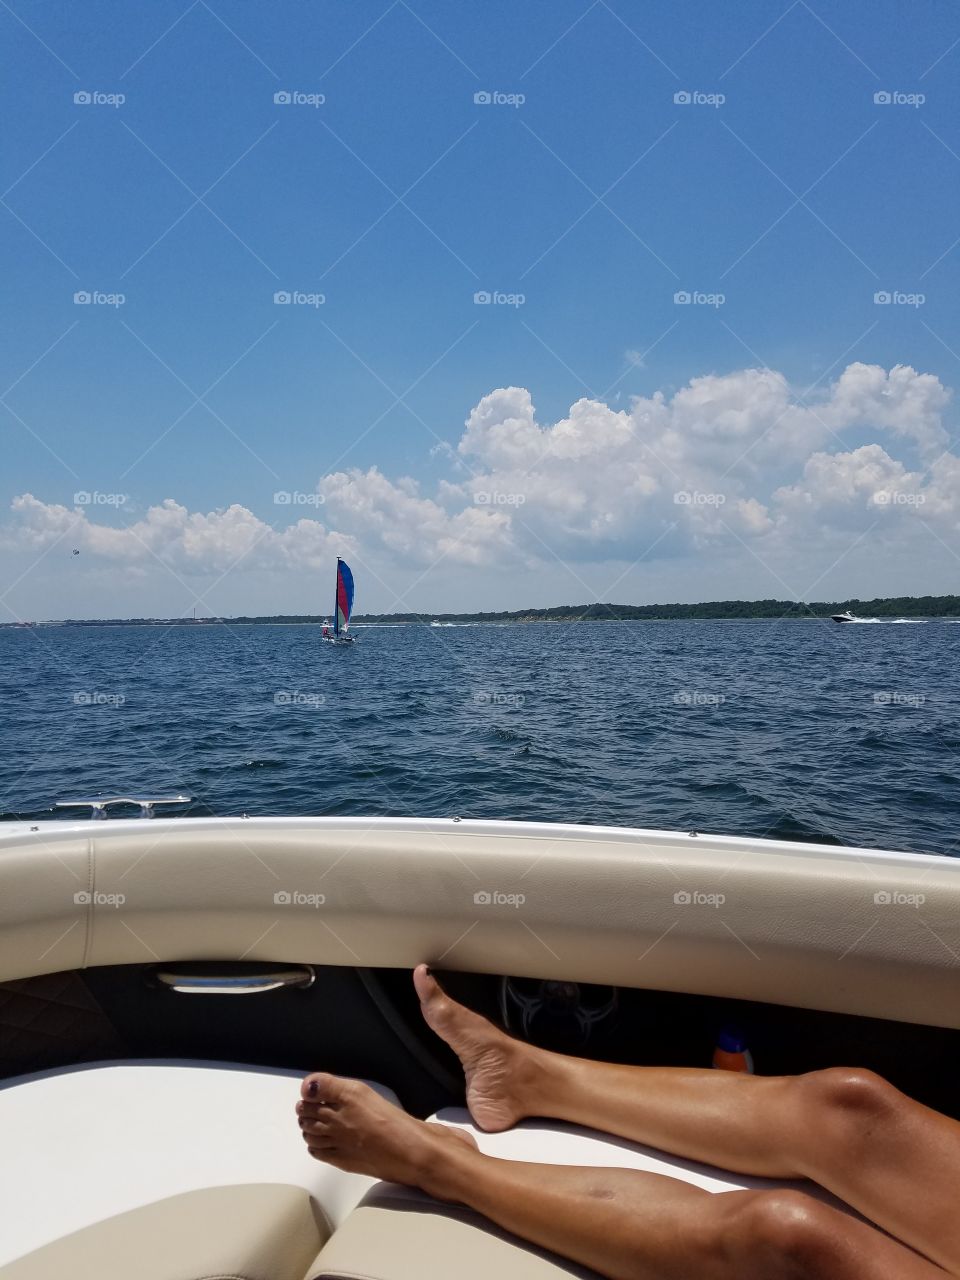 day out on the boat